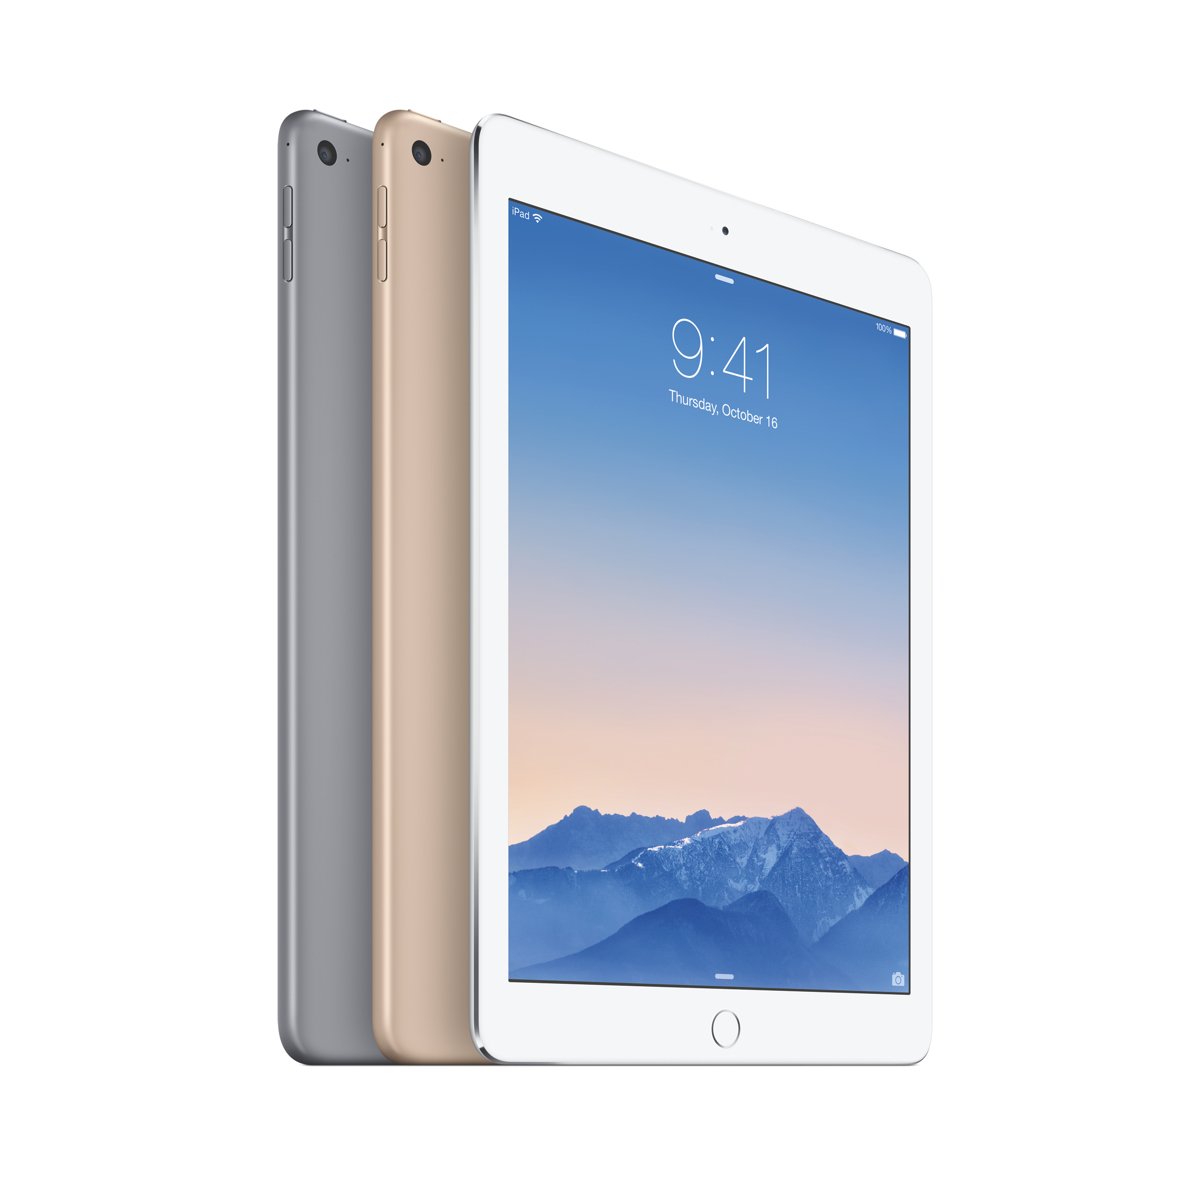 Here's the bottom line on iPad Air 2 color options.